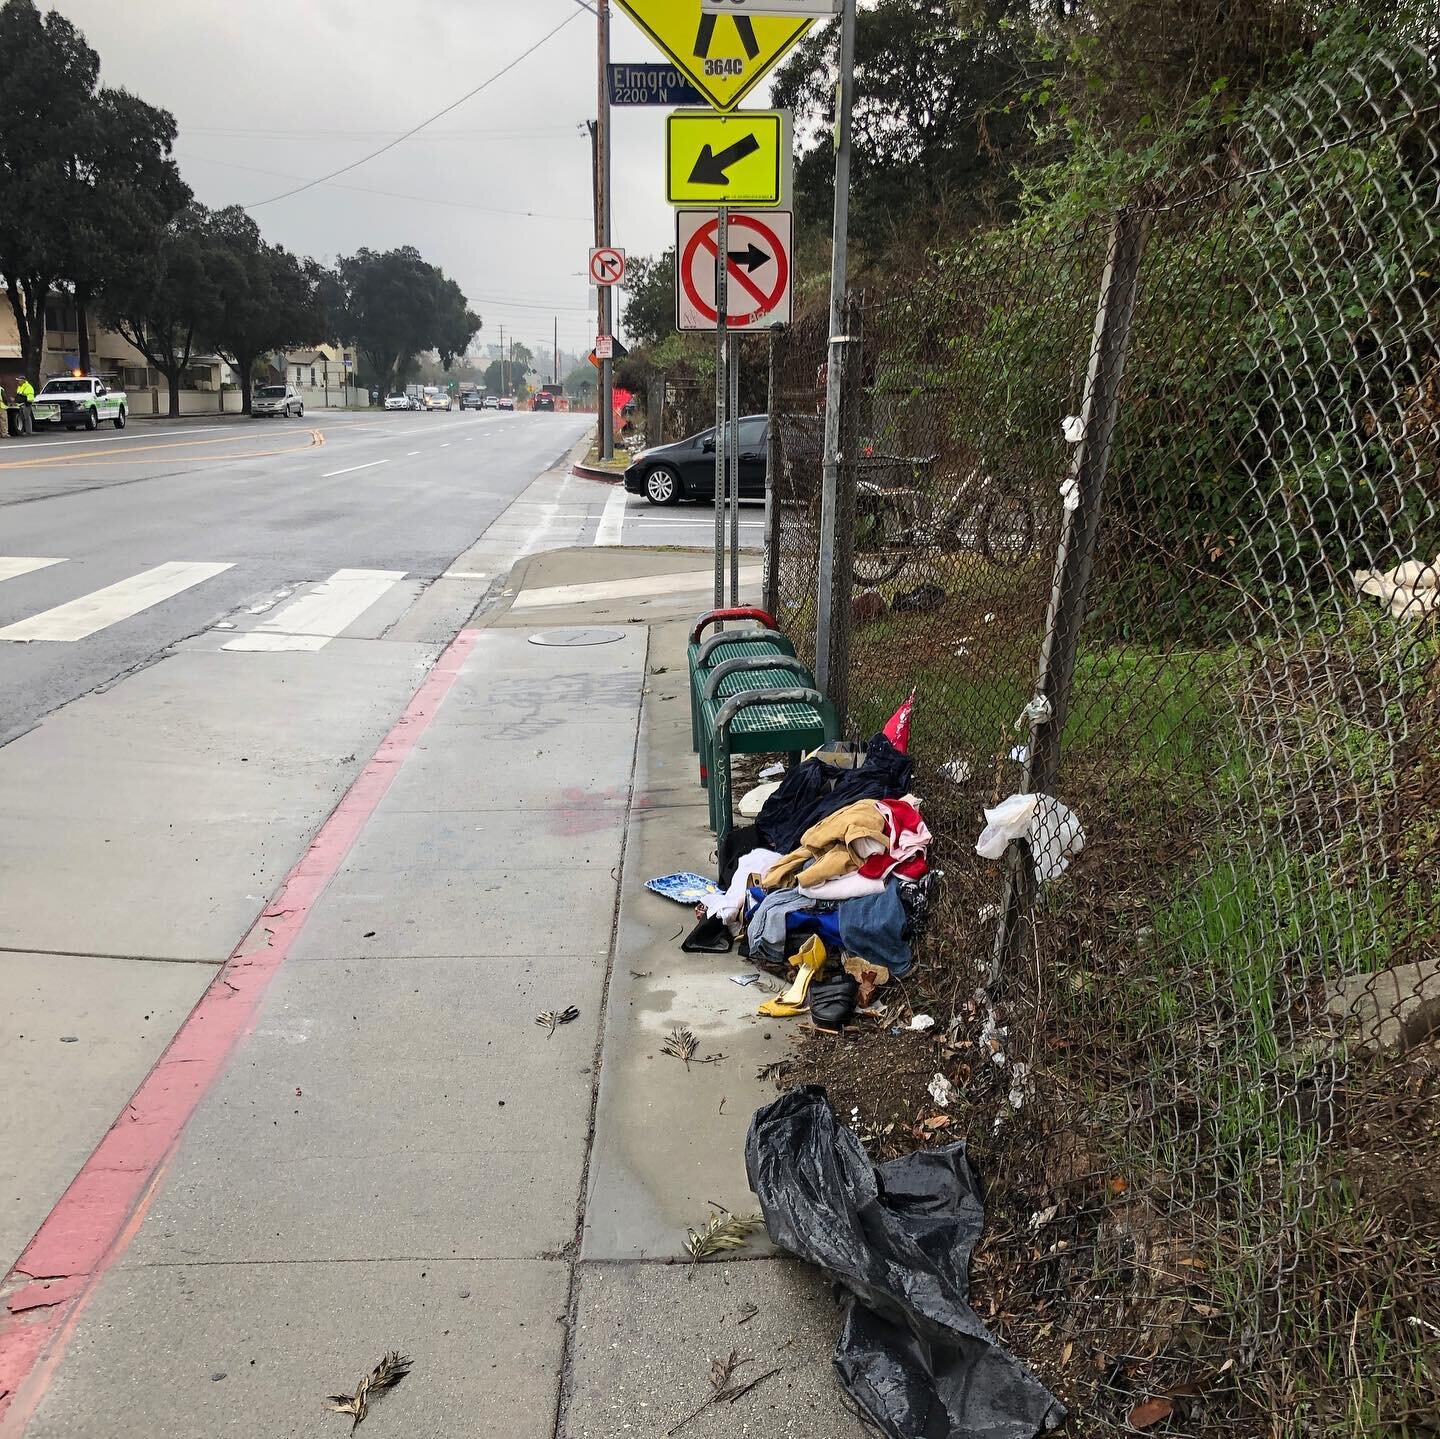 Before and After, Love Elysian Valley Cleanup on Riverside Drive and Elmgrove. @metrolosangeles we NEED and LOVE our Route 96 bus! #betterbusesforla #cd13 #mitchofarrell #loveelysianvalley